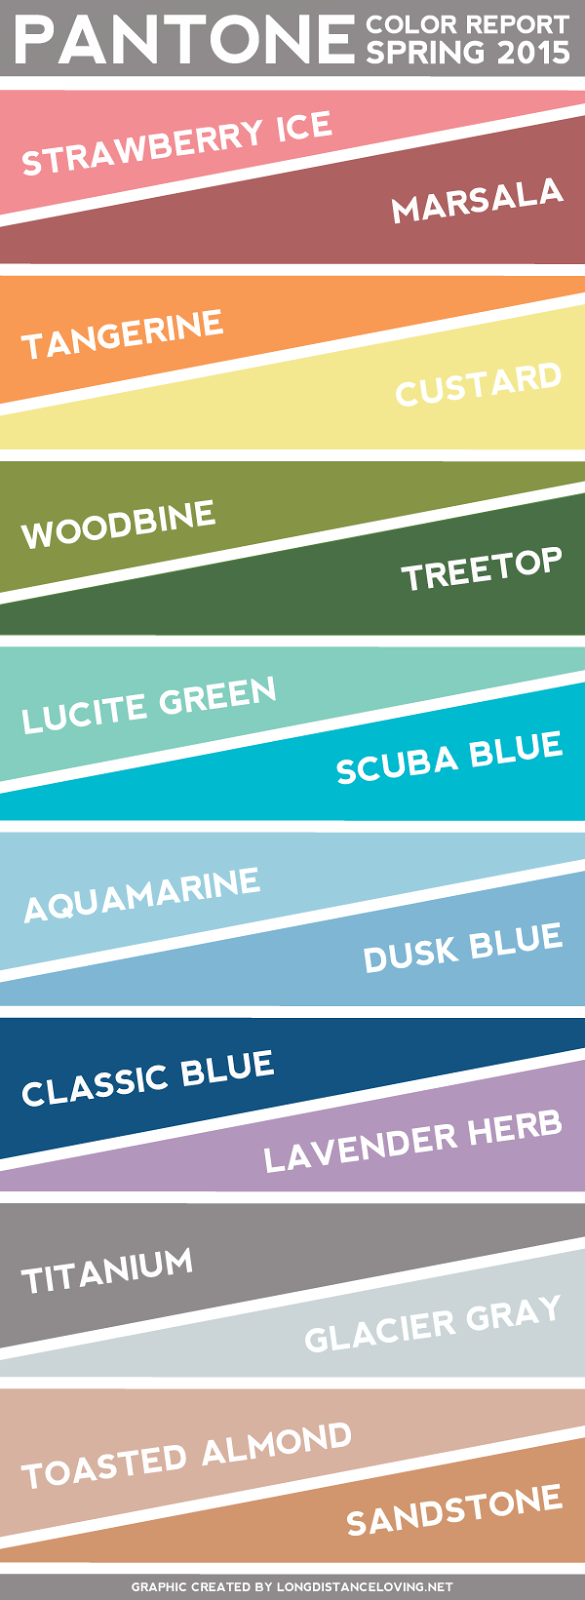 pantone color report: spring 2015 // graphic by @luvfromafar